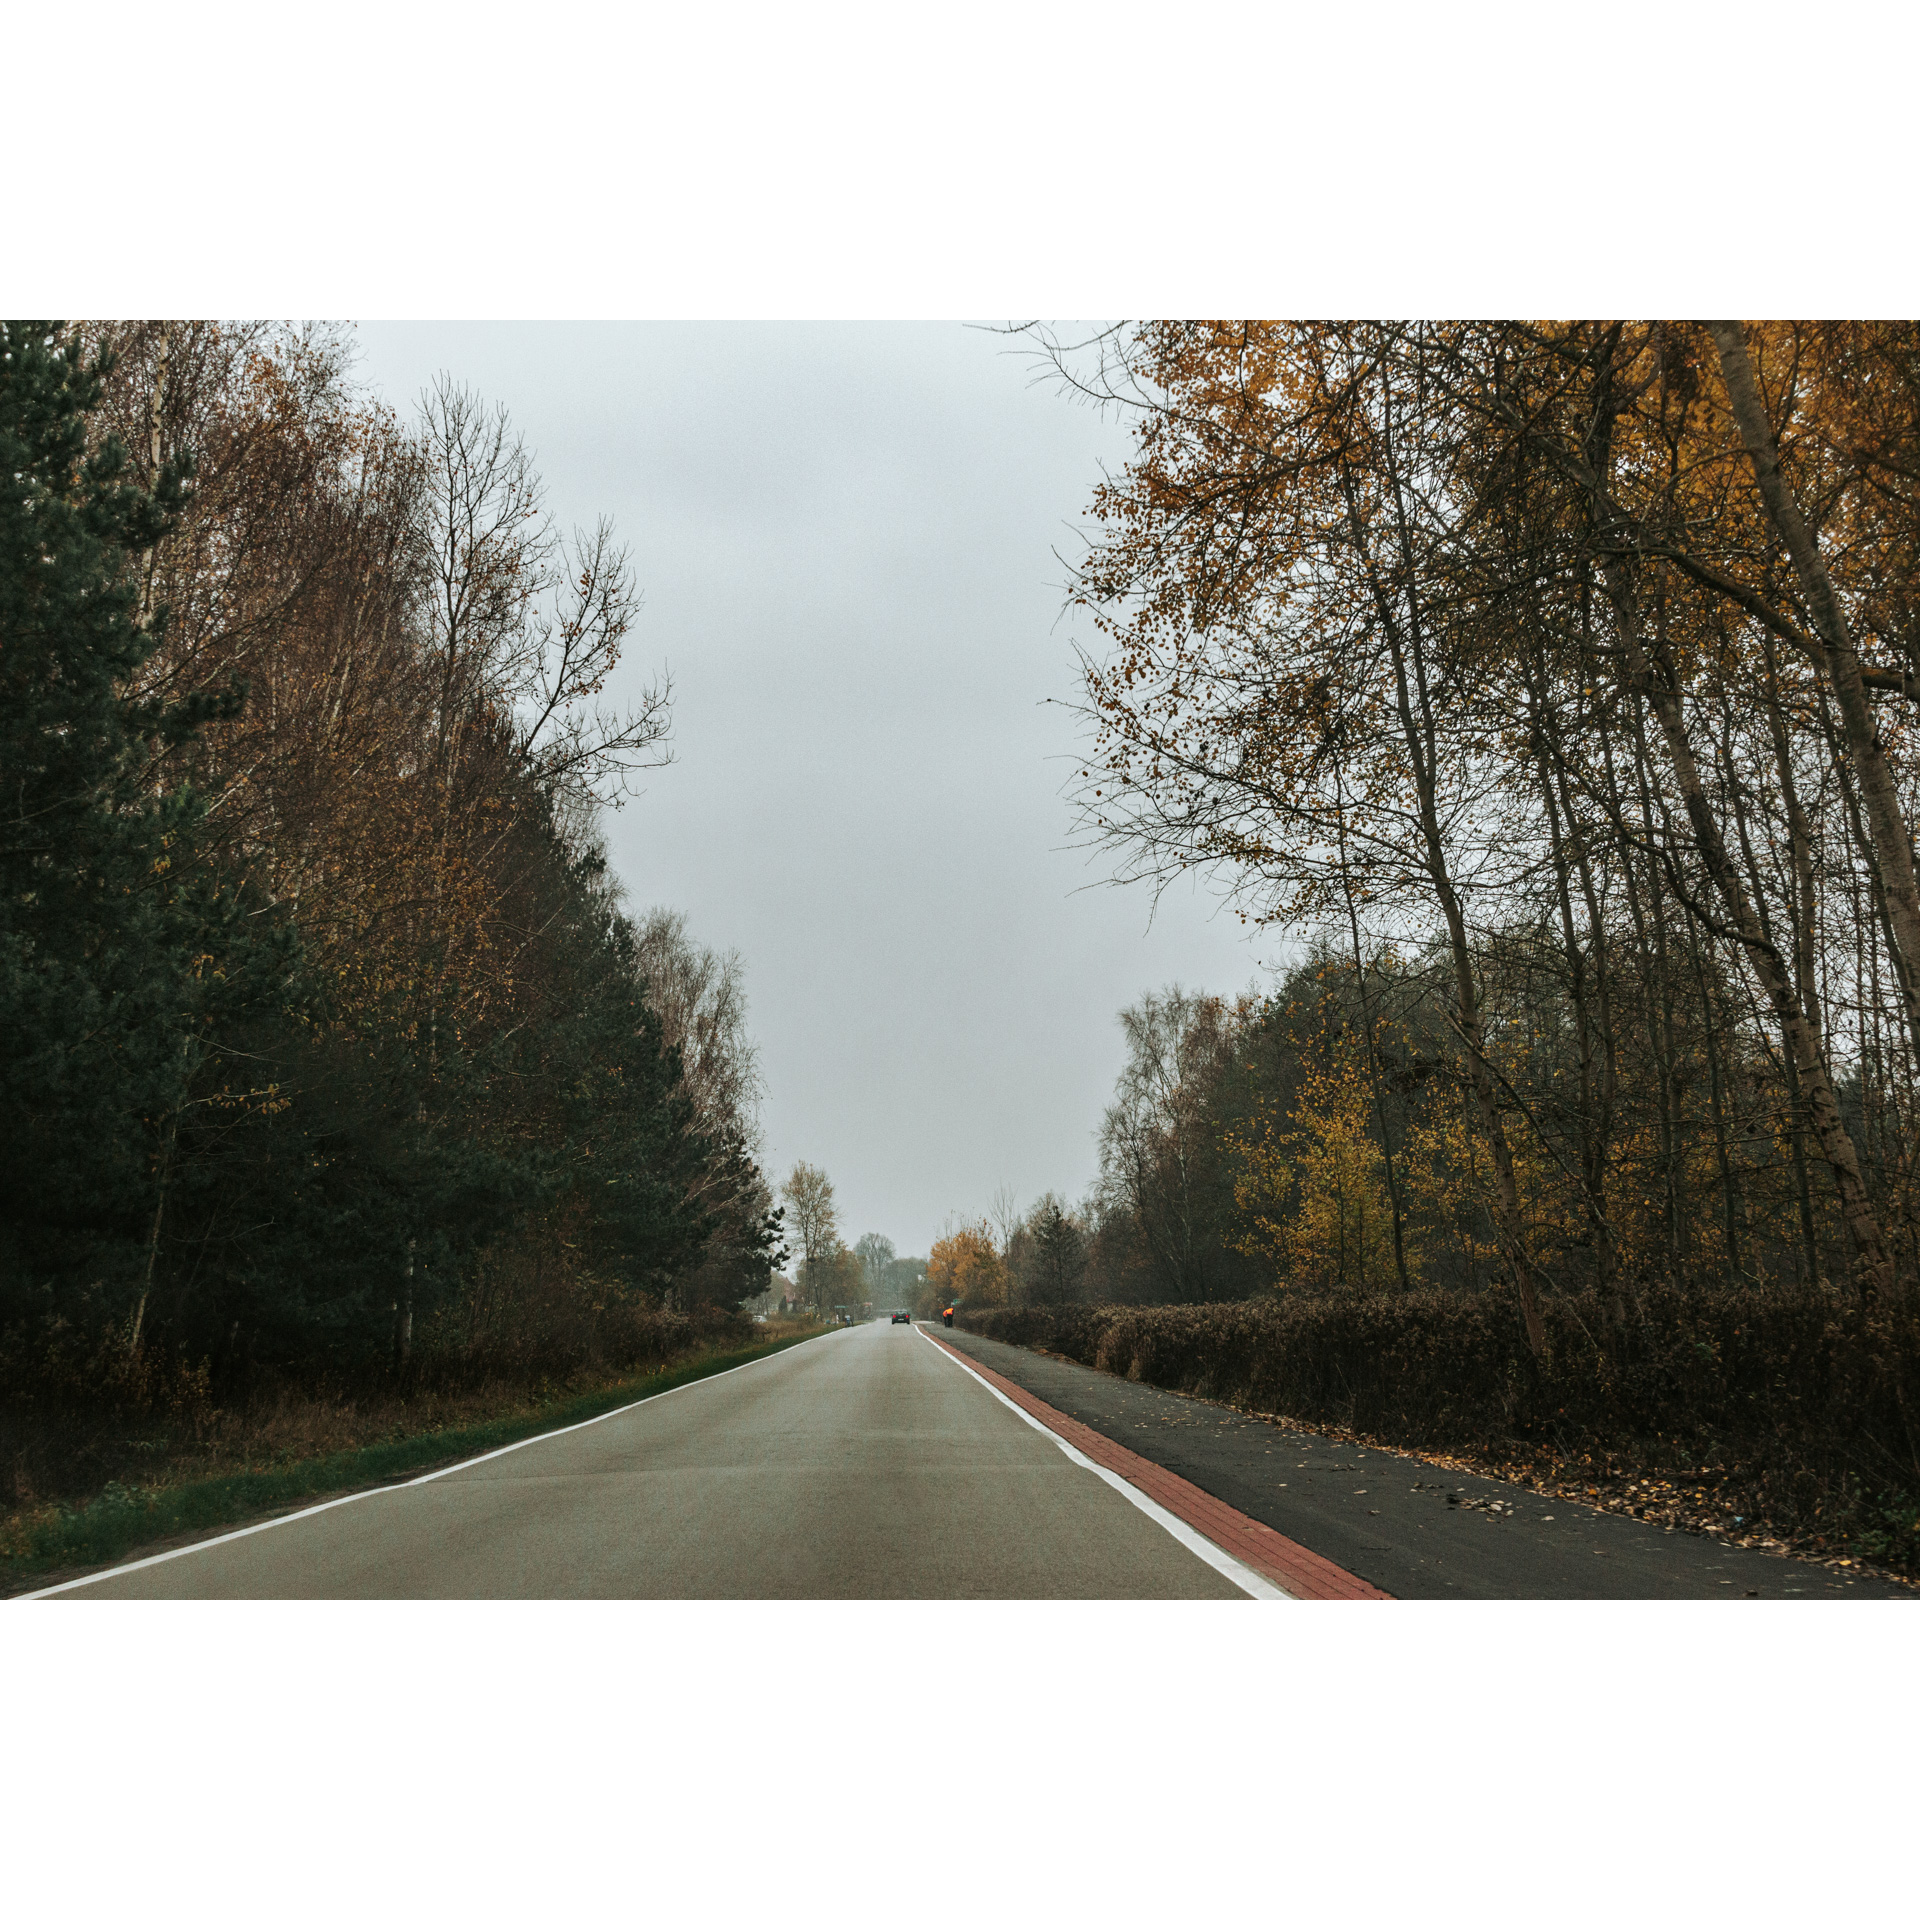 Asphalt road running through the forest and gray sky